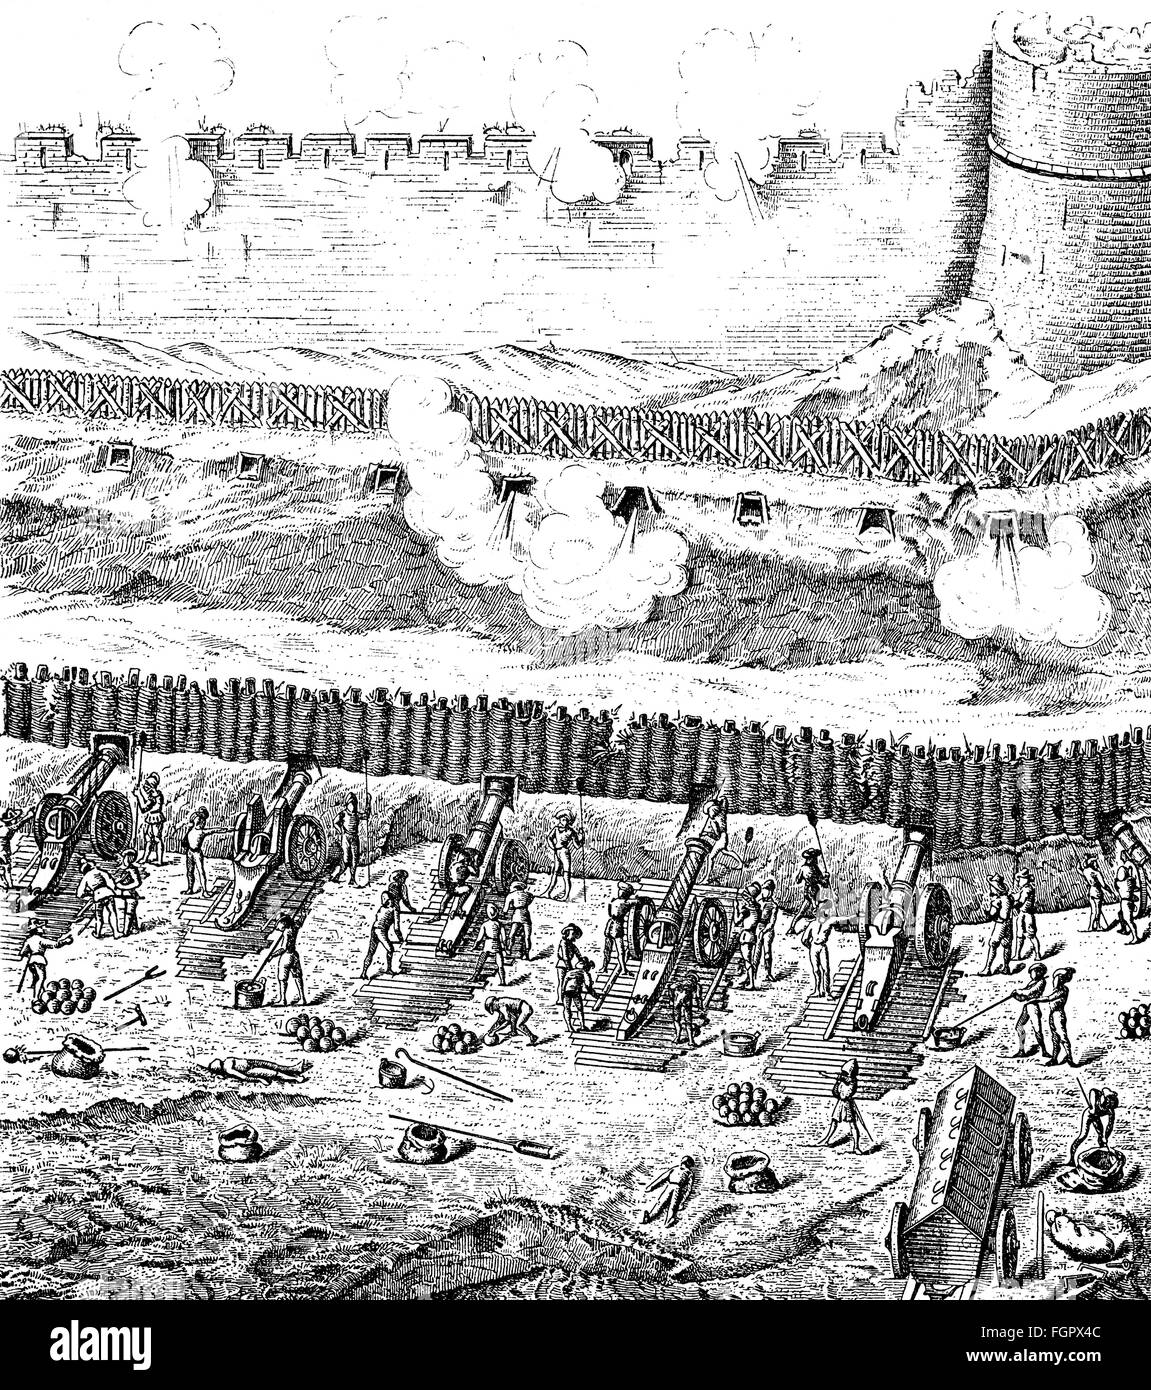 military, siege, artillery firing at a fortress, woodcut, by Hans Burgkmair the Elder, from 'Weisskunig', by Emperor Maximilian I, circa 1514, Additional-Rights-Clearences-Not Available Stock Photo